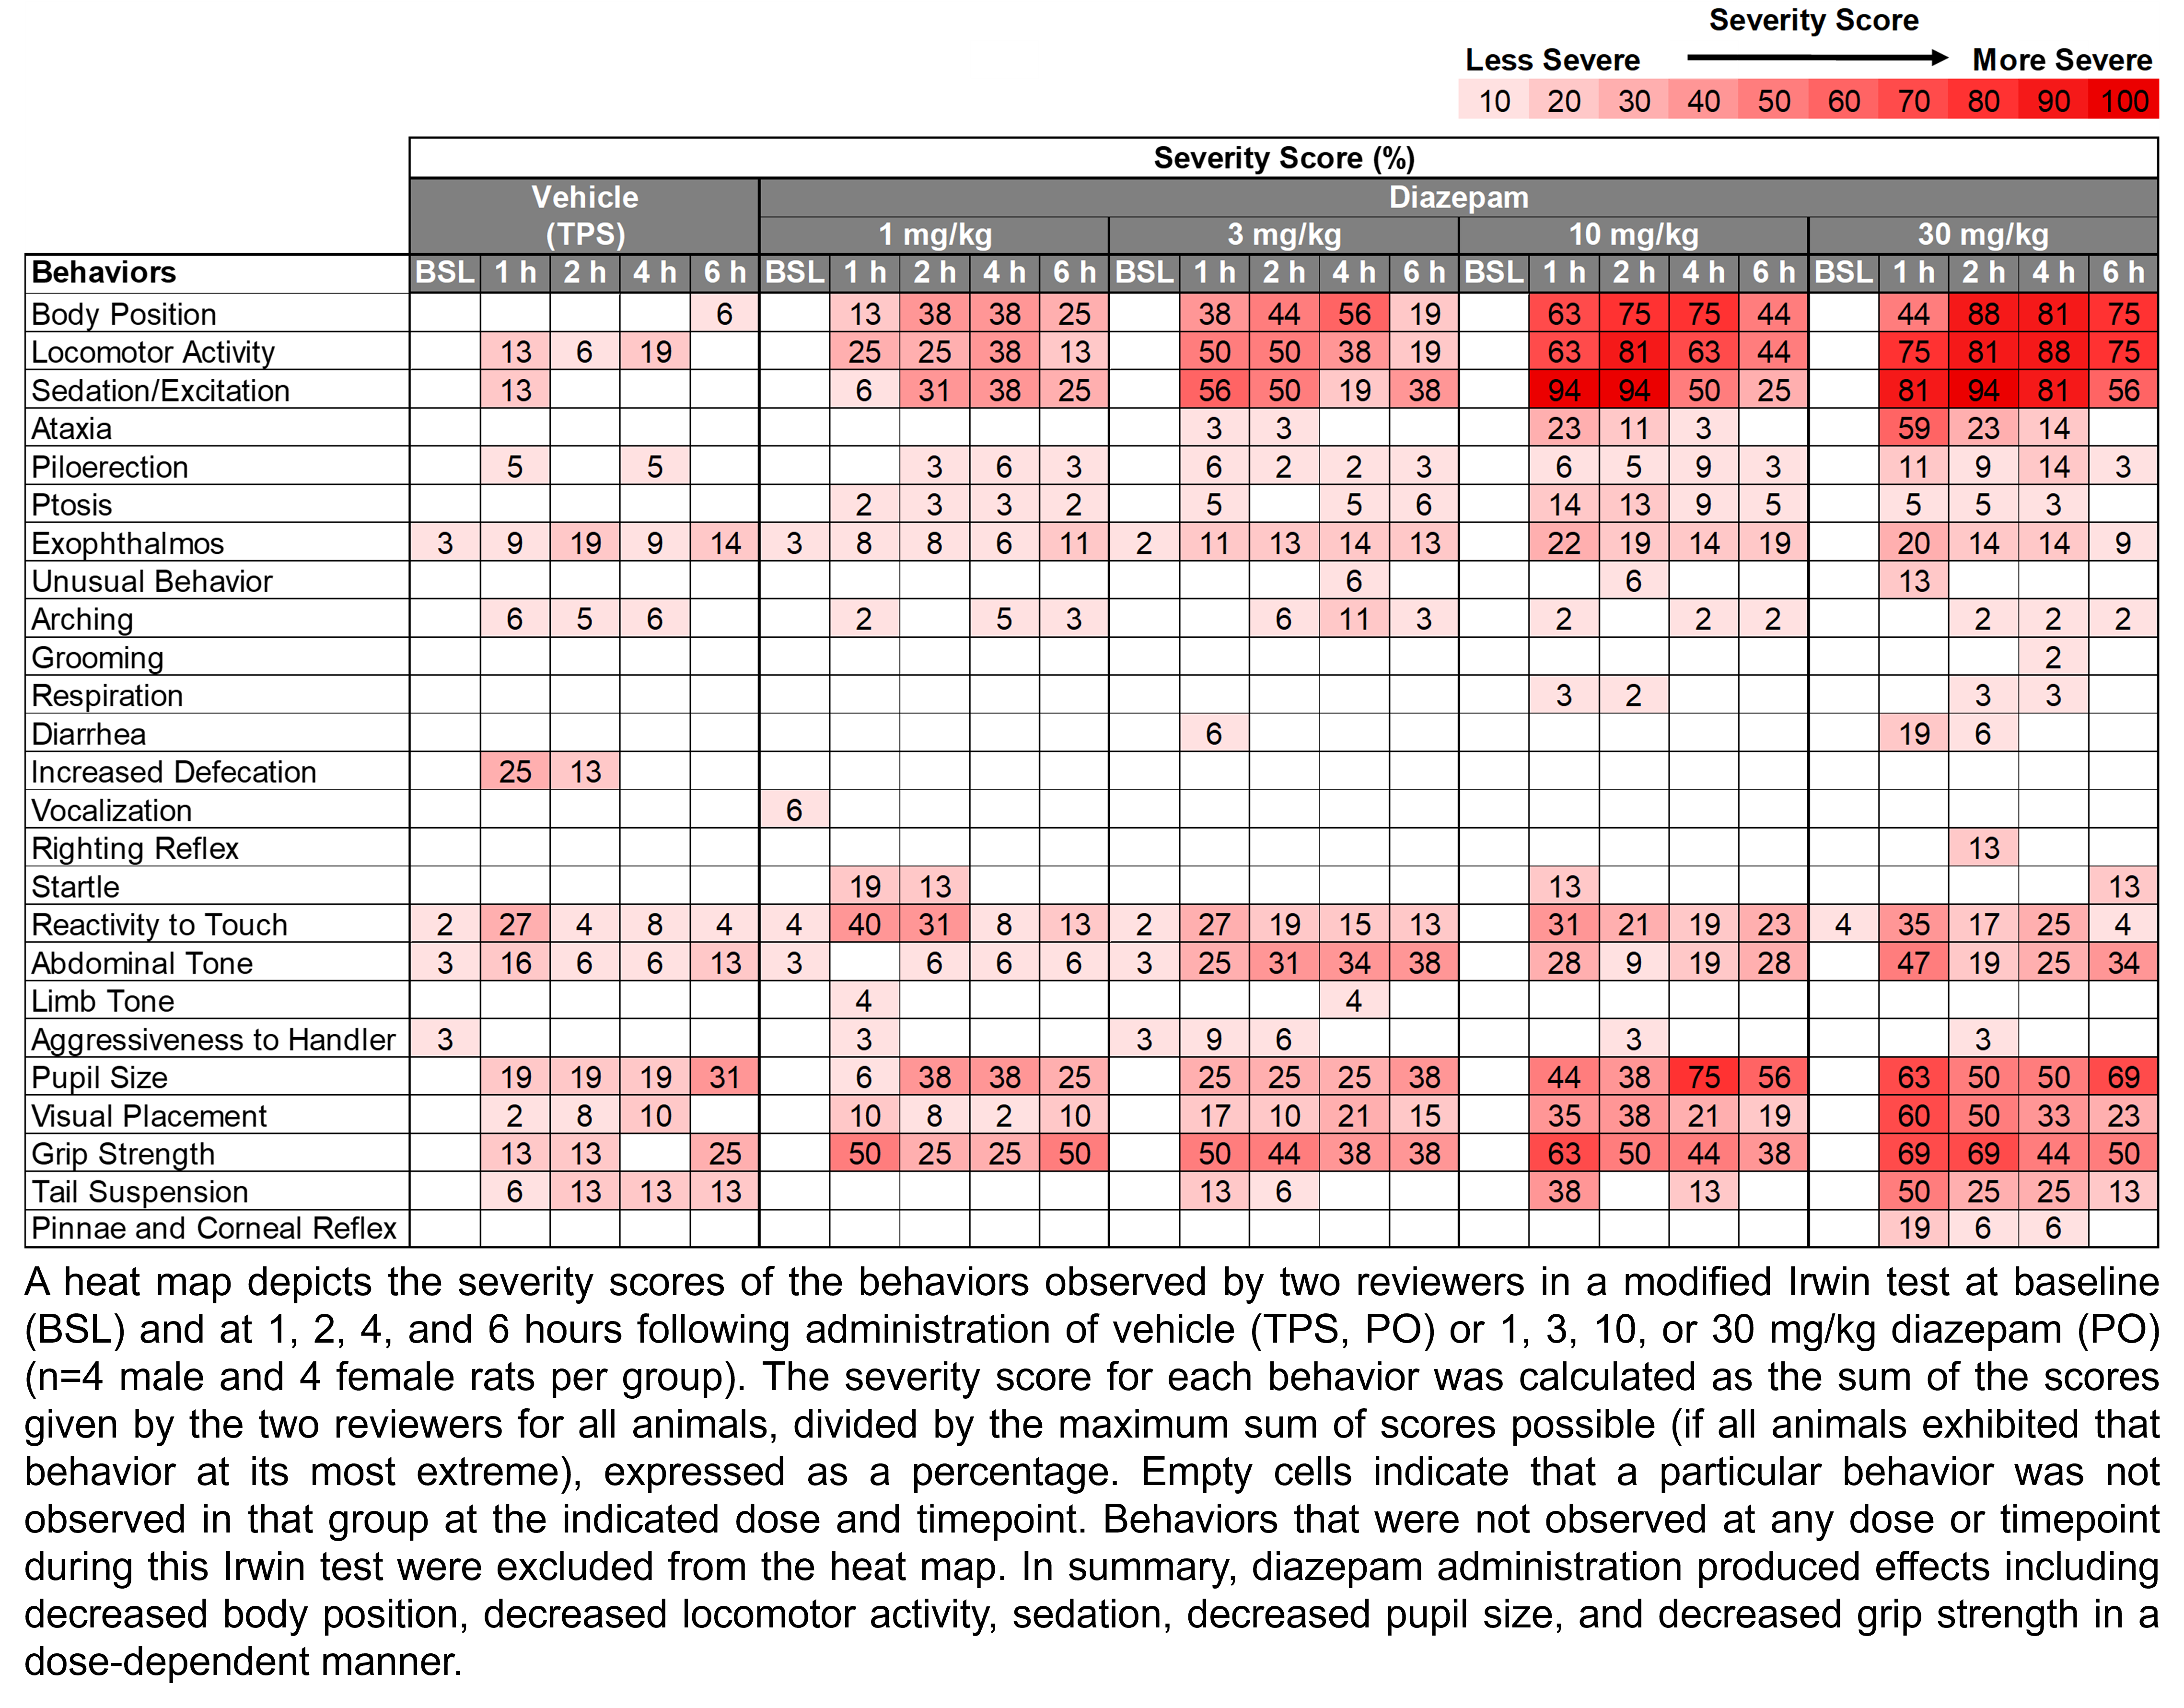 A heat map depicts the severity of the behaviors observed by two reviewers in a modified Irwin test at baseline and at 1, 2, 4, and 6 hours following the administration of vehicle (5% Tween 80 and 5% PEG 300 in saline, delivered PO) or diazepam (1, 3, 10, or 30 mg/kg, delivered PO). There were 8 rats per group (4 male and 4 female). Severity score was calculated as the sum of scores given by the two reviewers for all animals at that dose and timepoint divided by the maximum possible score, transformed into a percentage. In summary, diazepam administration led to decreased body position, decreased locomotor activity, sedation, ataxia, decreased pupil size, decreased visual placement, and decreased grip strength in a dose-dependent manner.